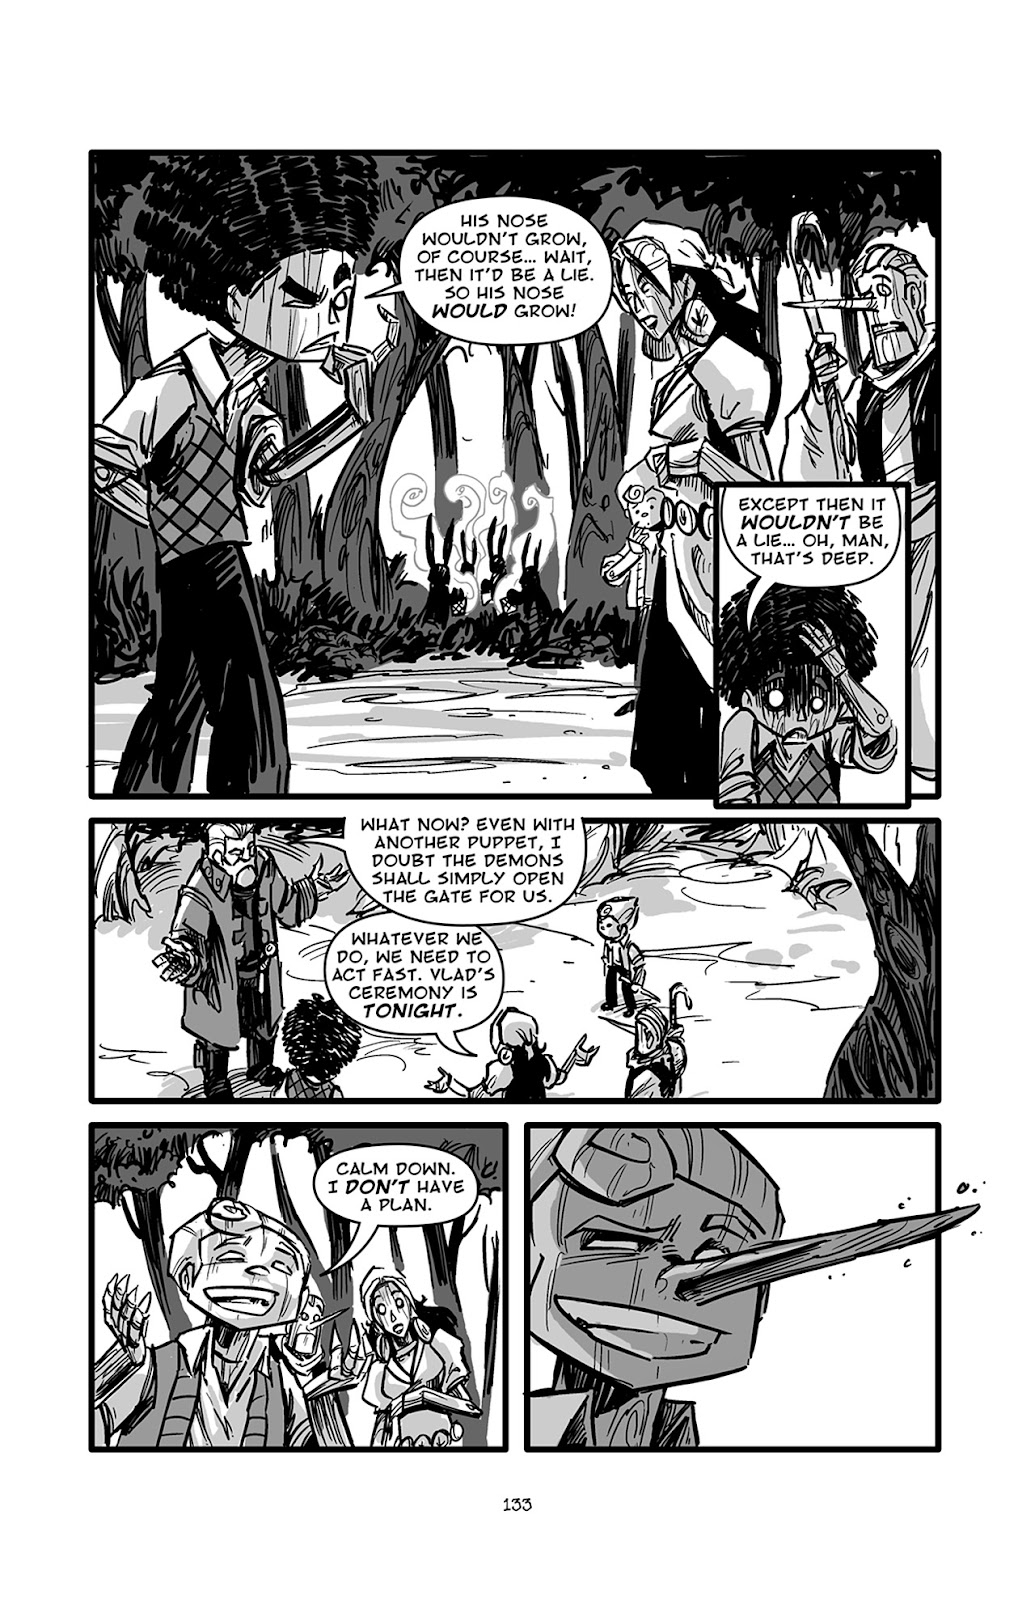 Pinocchio: Vampire Slayer - Of Wood and Blood issue 6 - Page 10